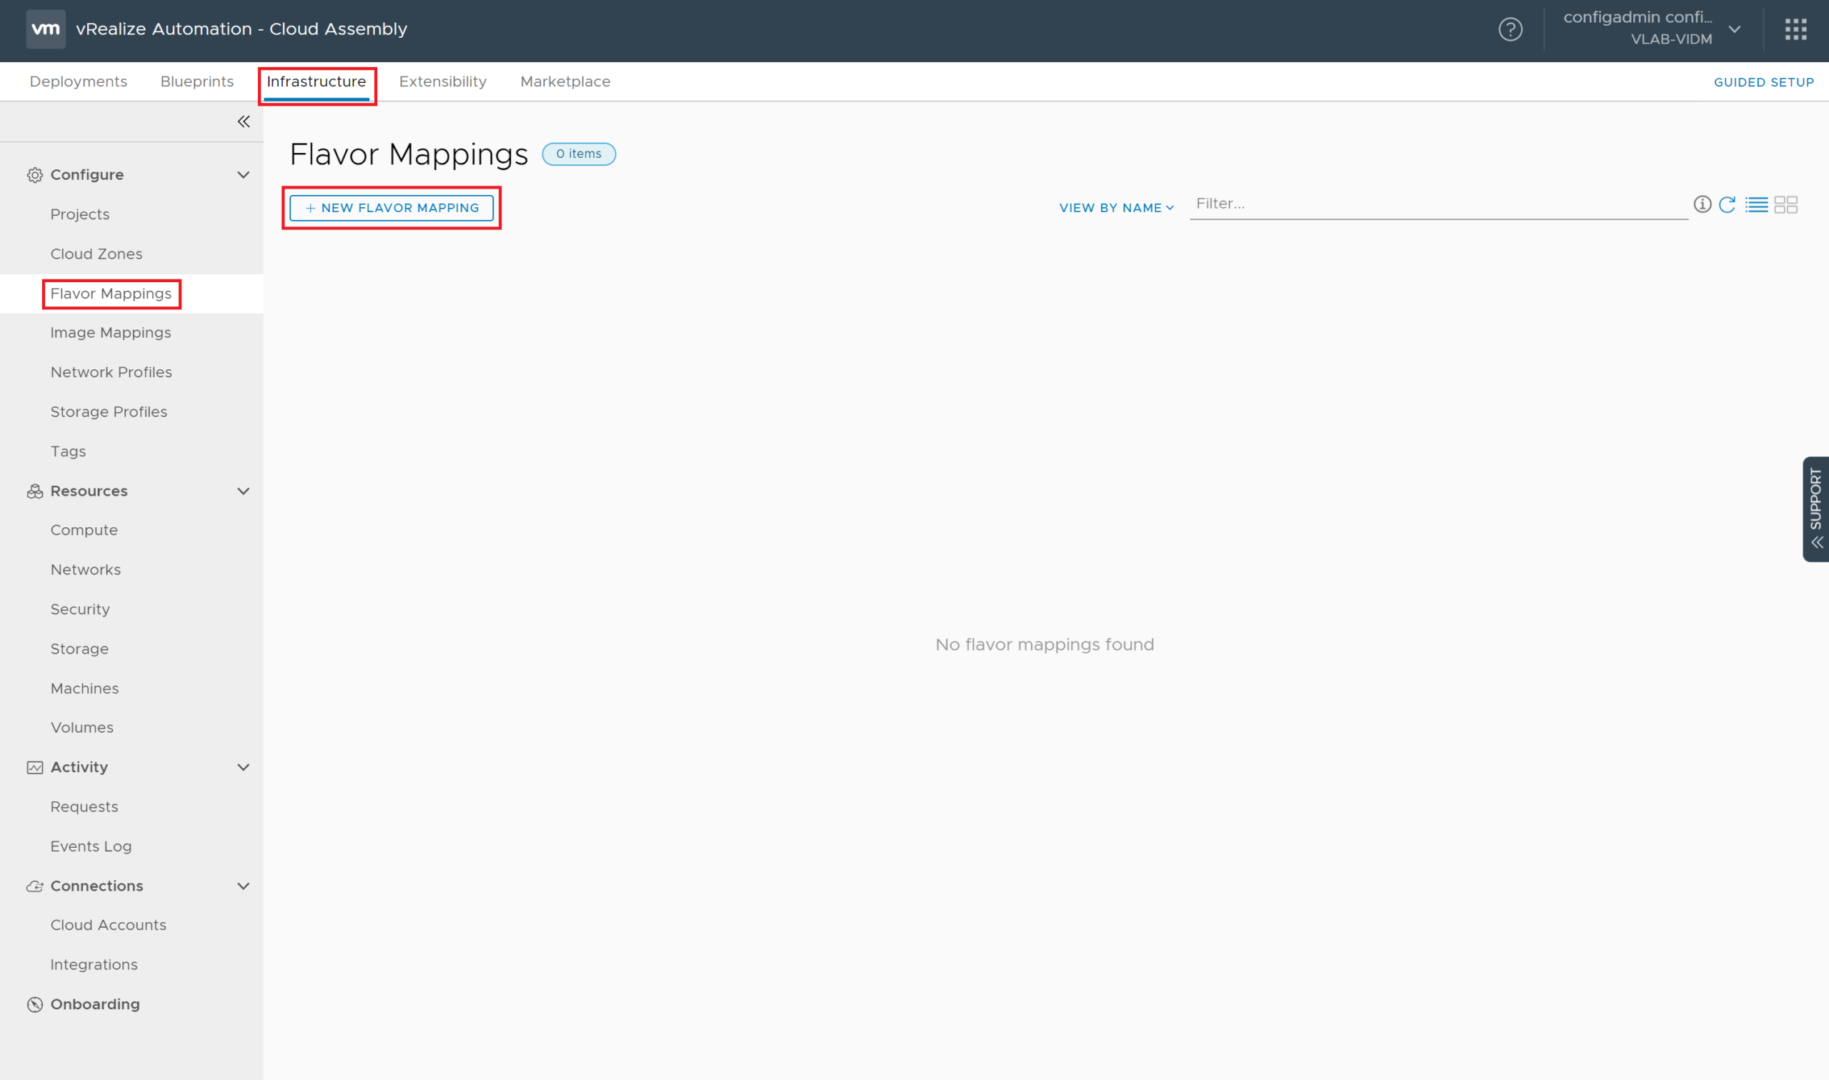 vRealize Automation 8.0 - Cloud Assembly - Flavor Mappings